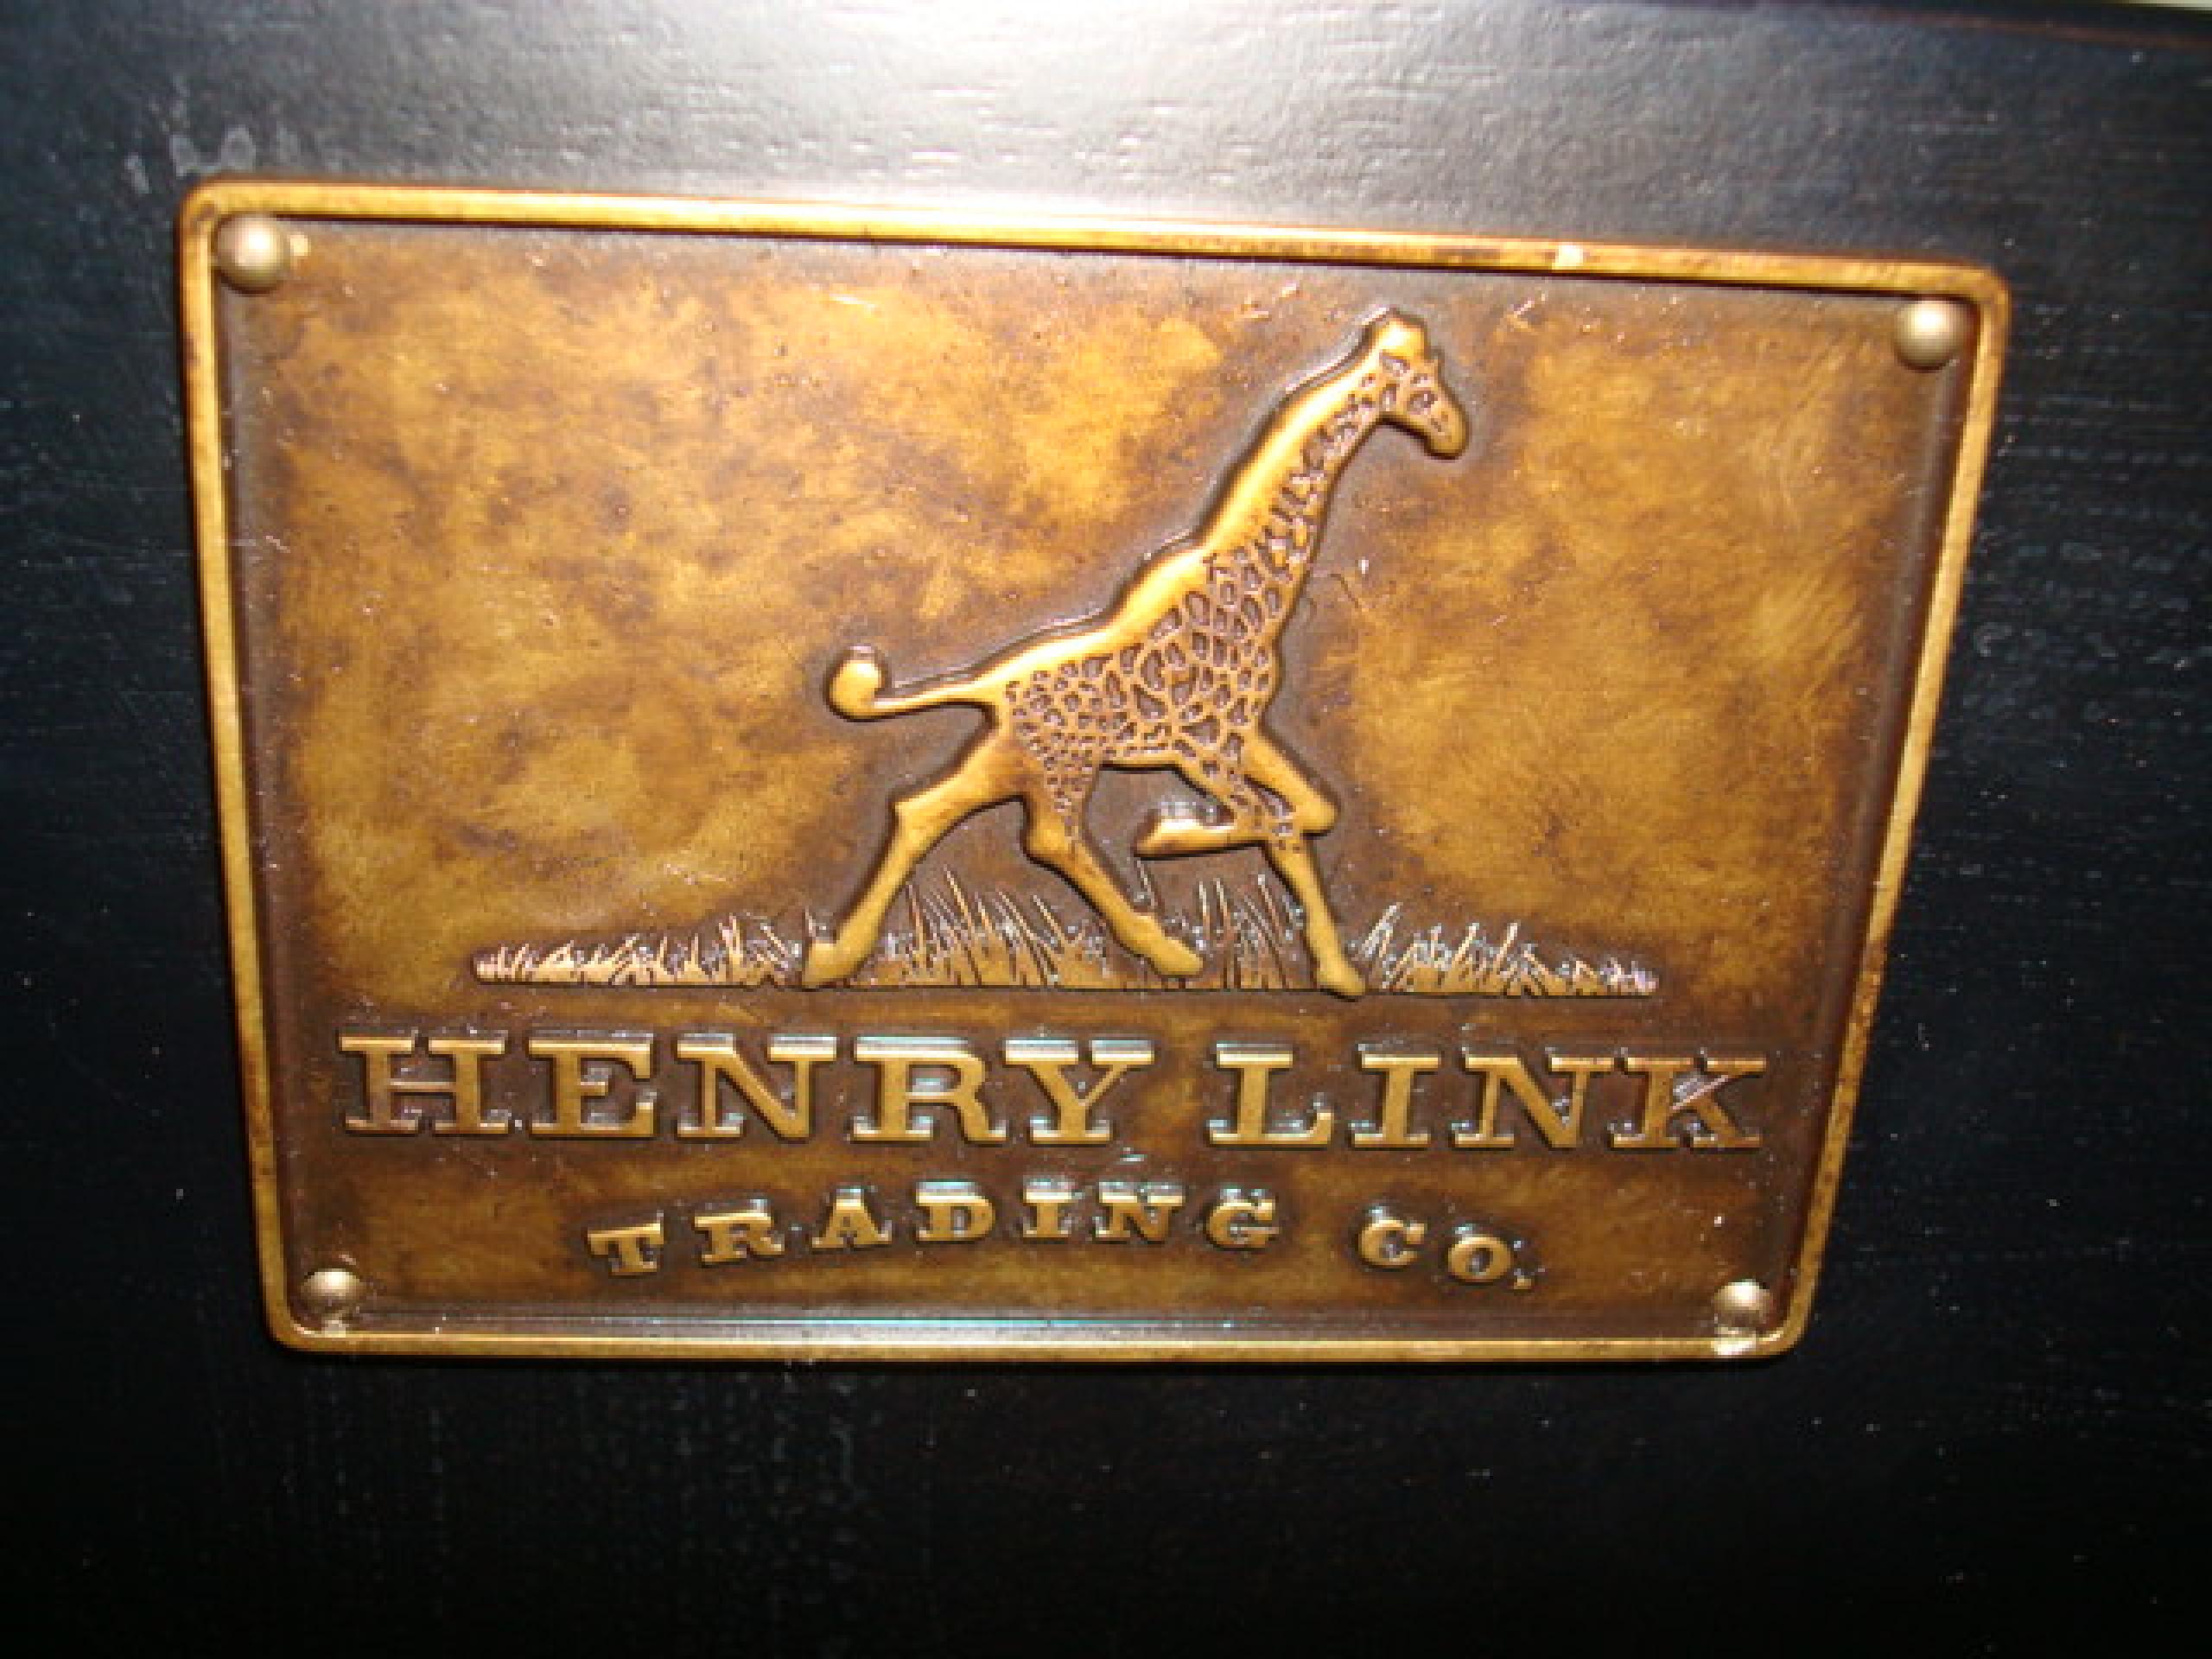  HENRY LINK TRADING CO.